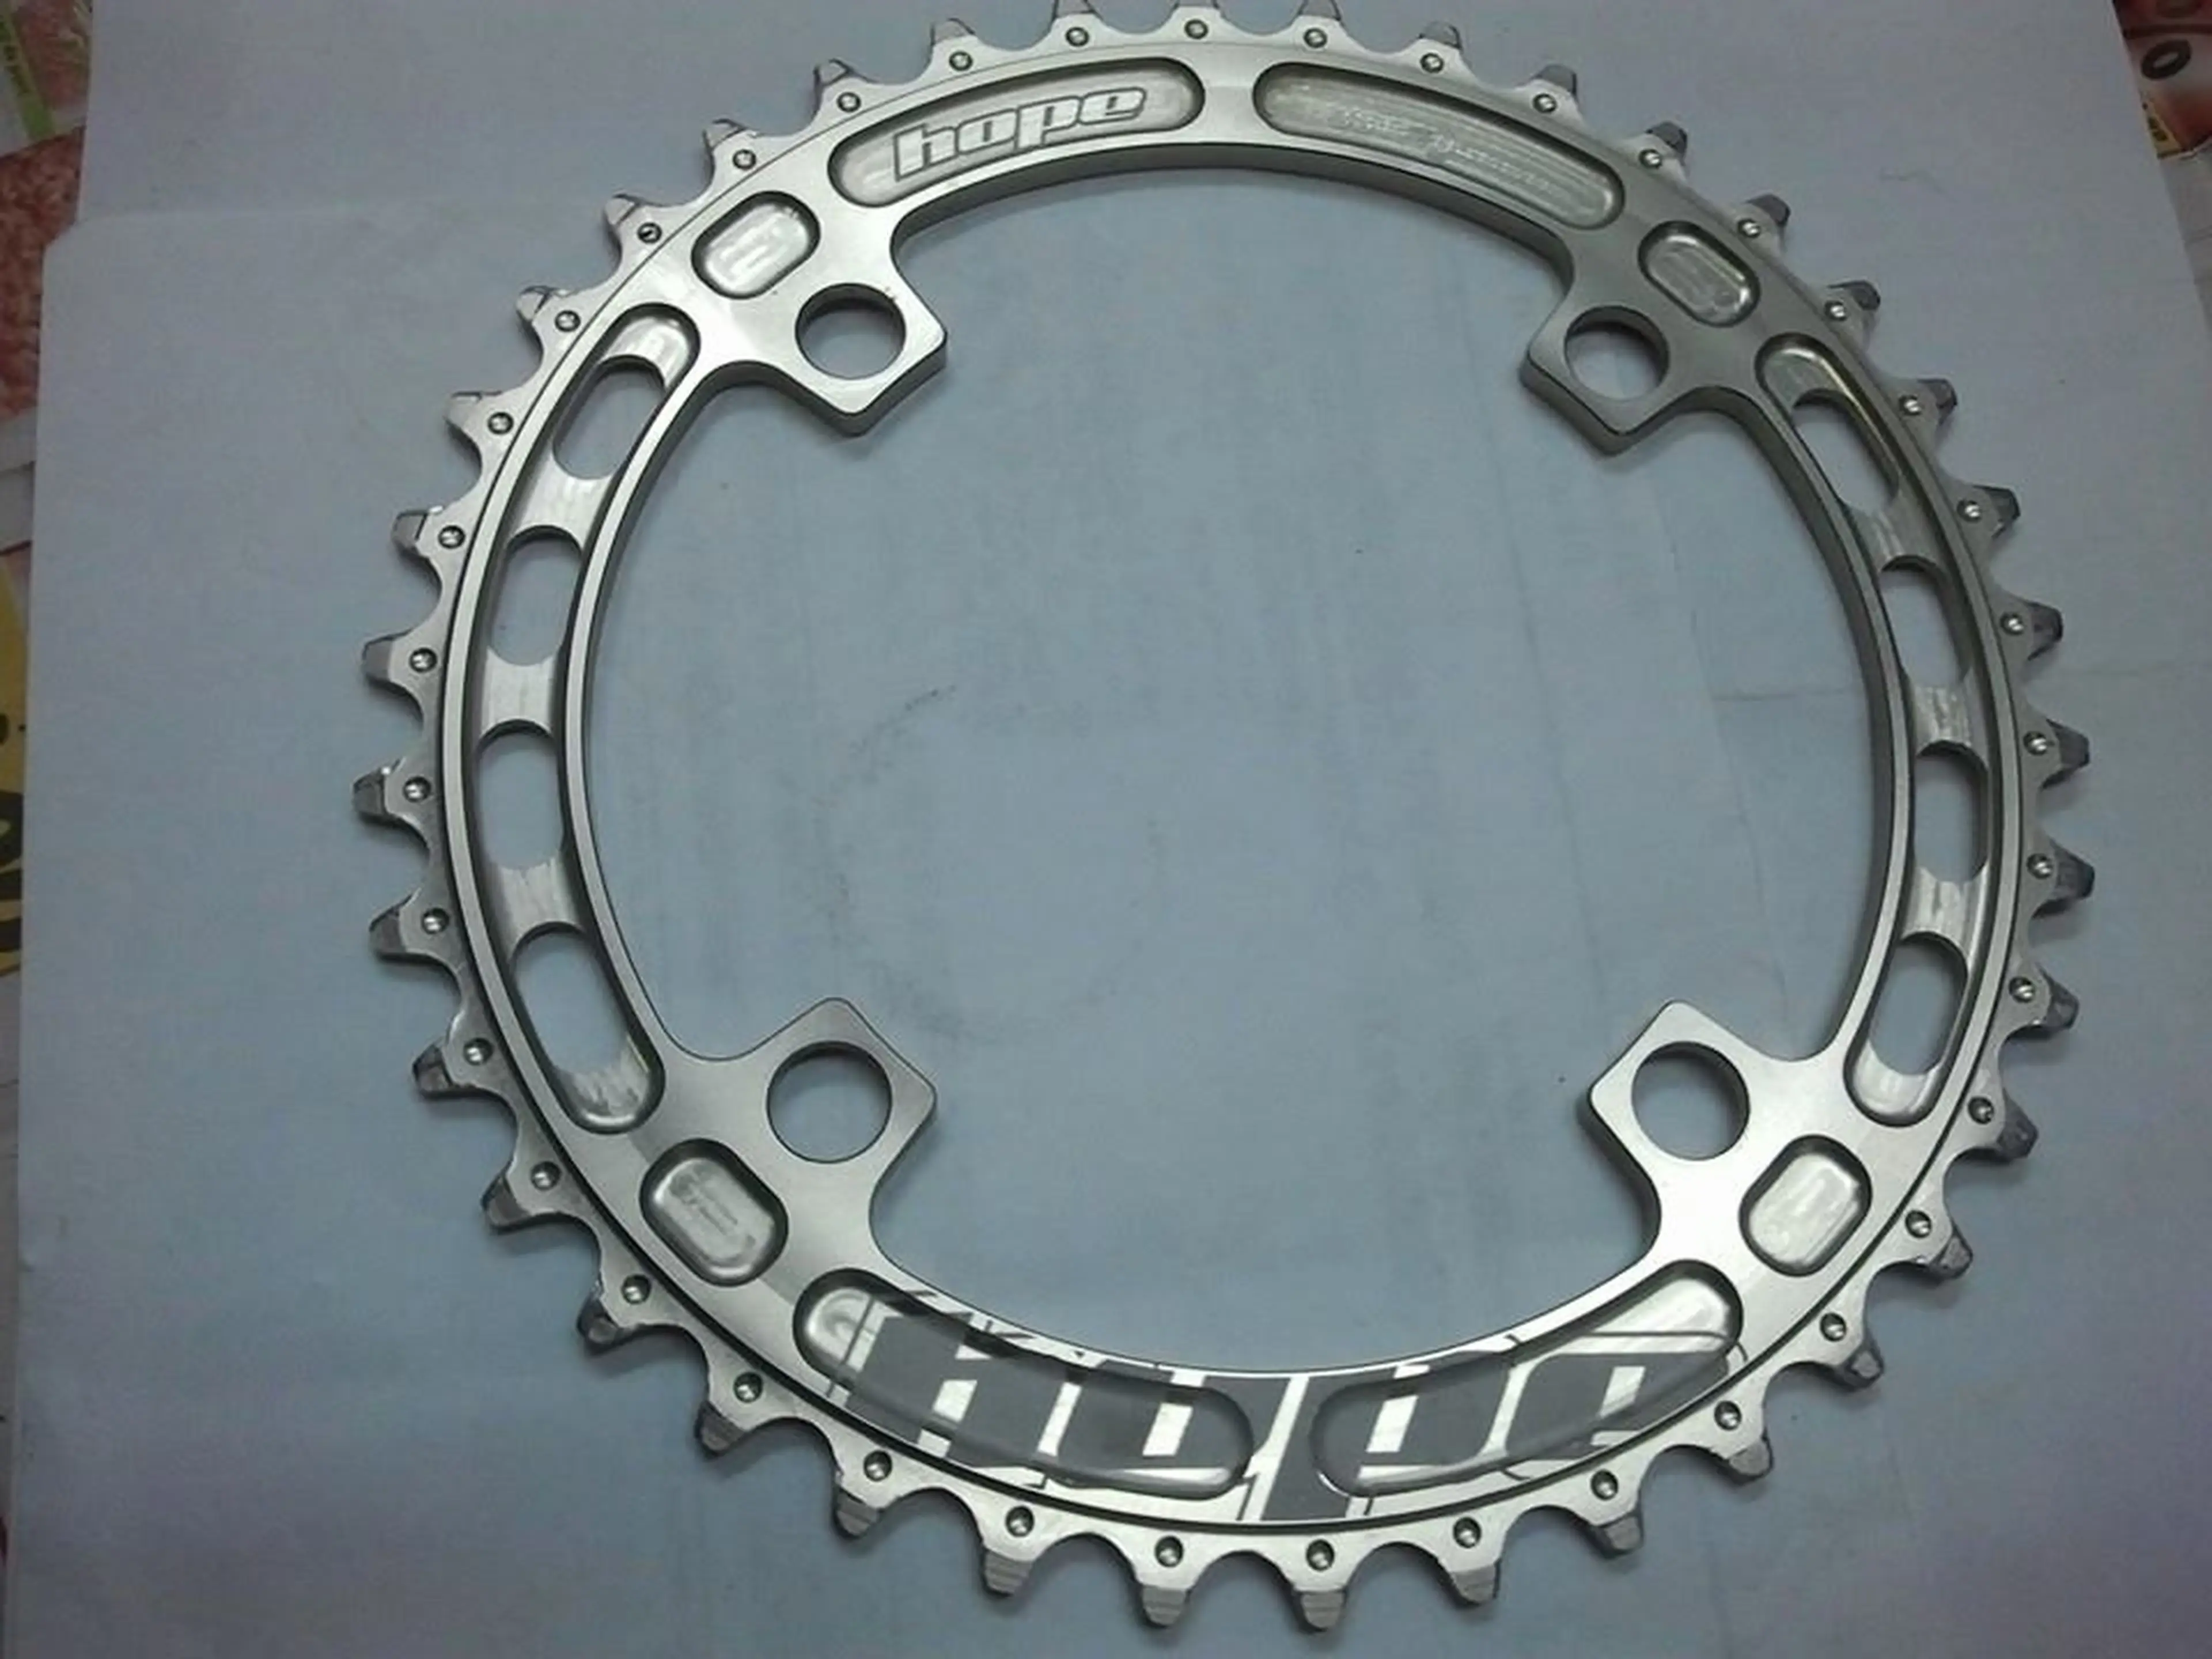 2. Hope Chainring